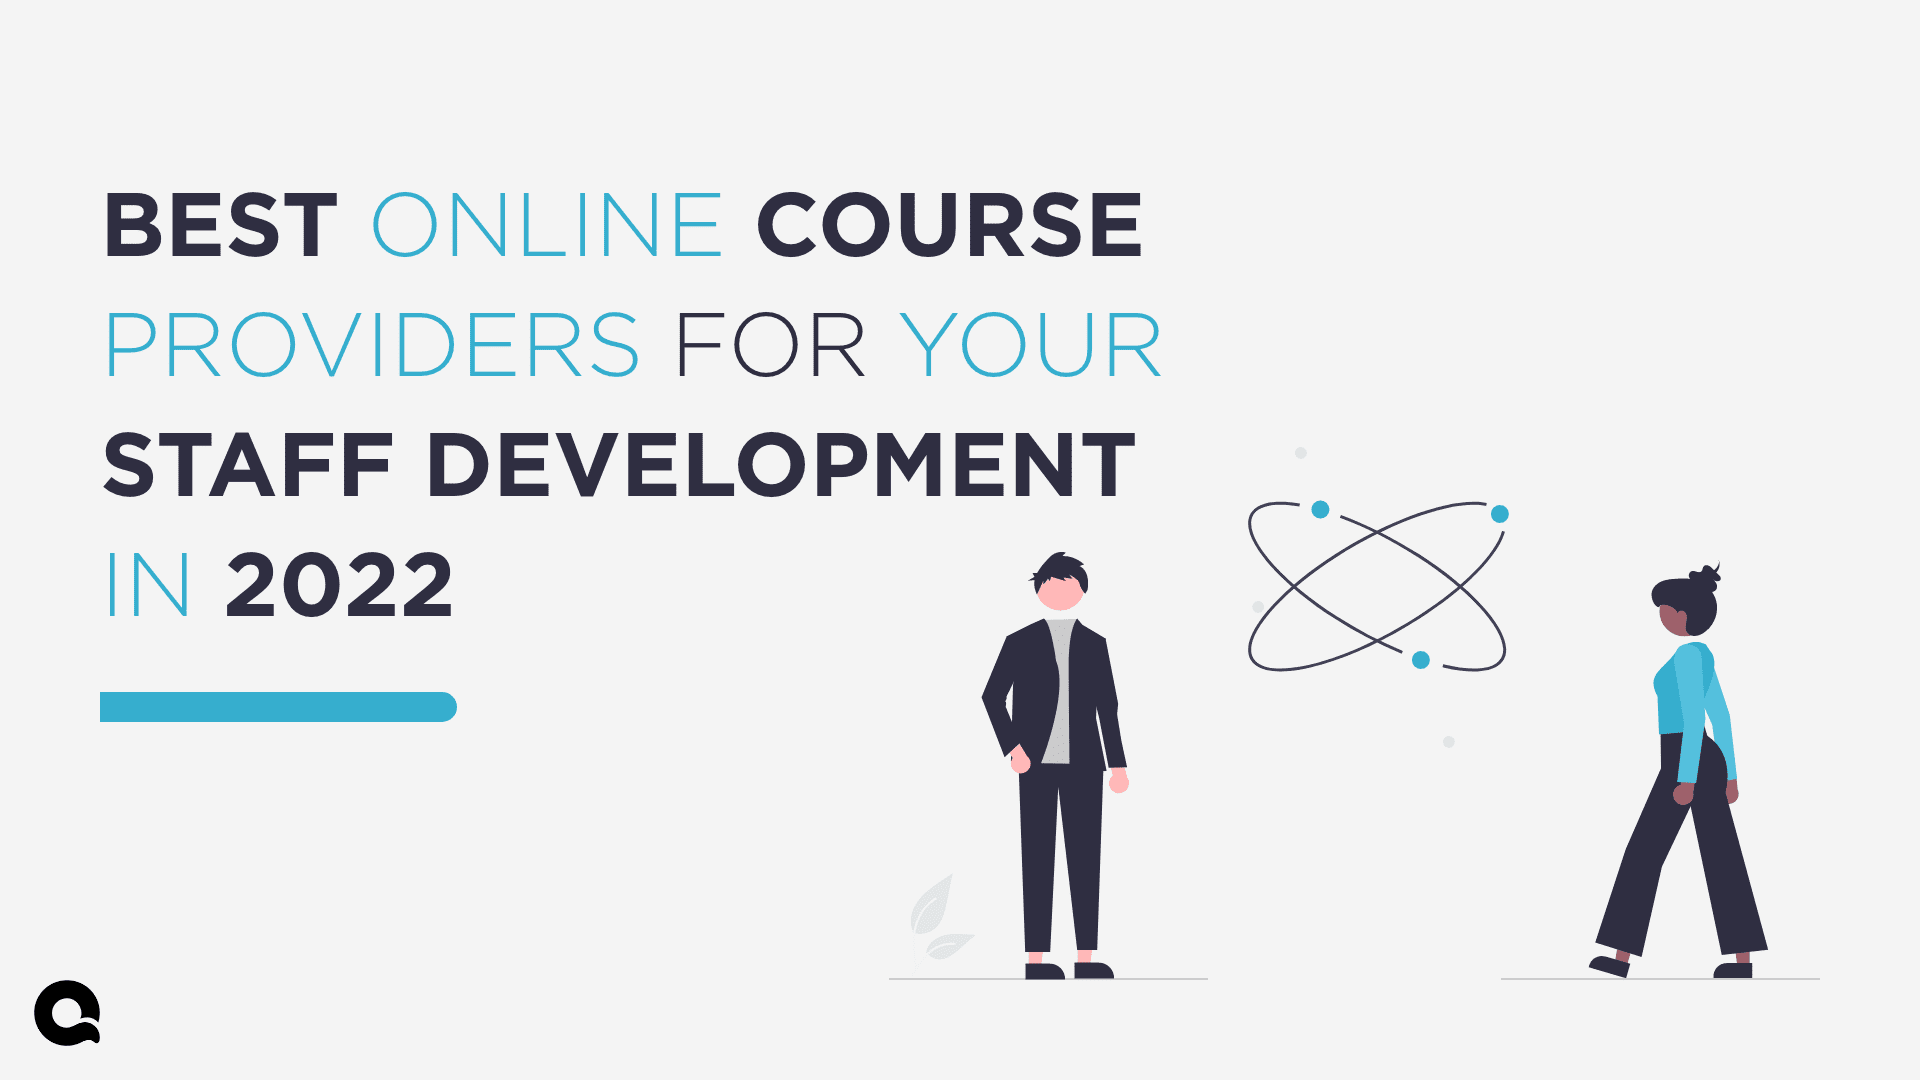 Best Online Course Providers for Your Staff Development in 2022